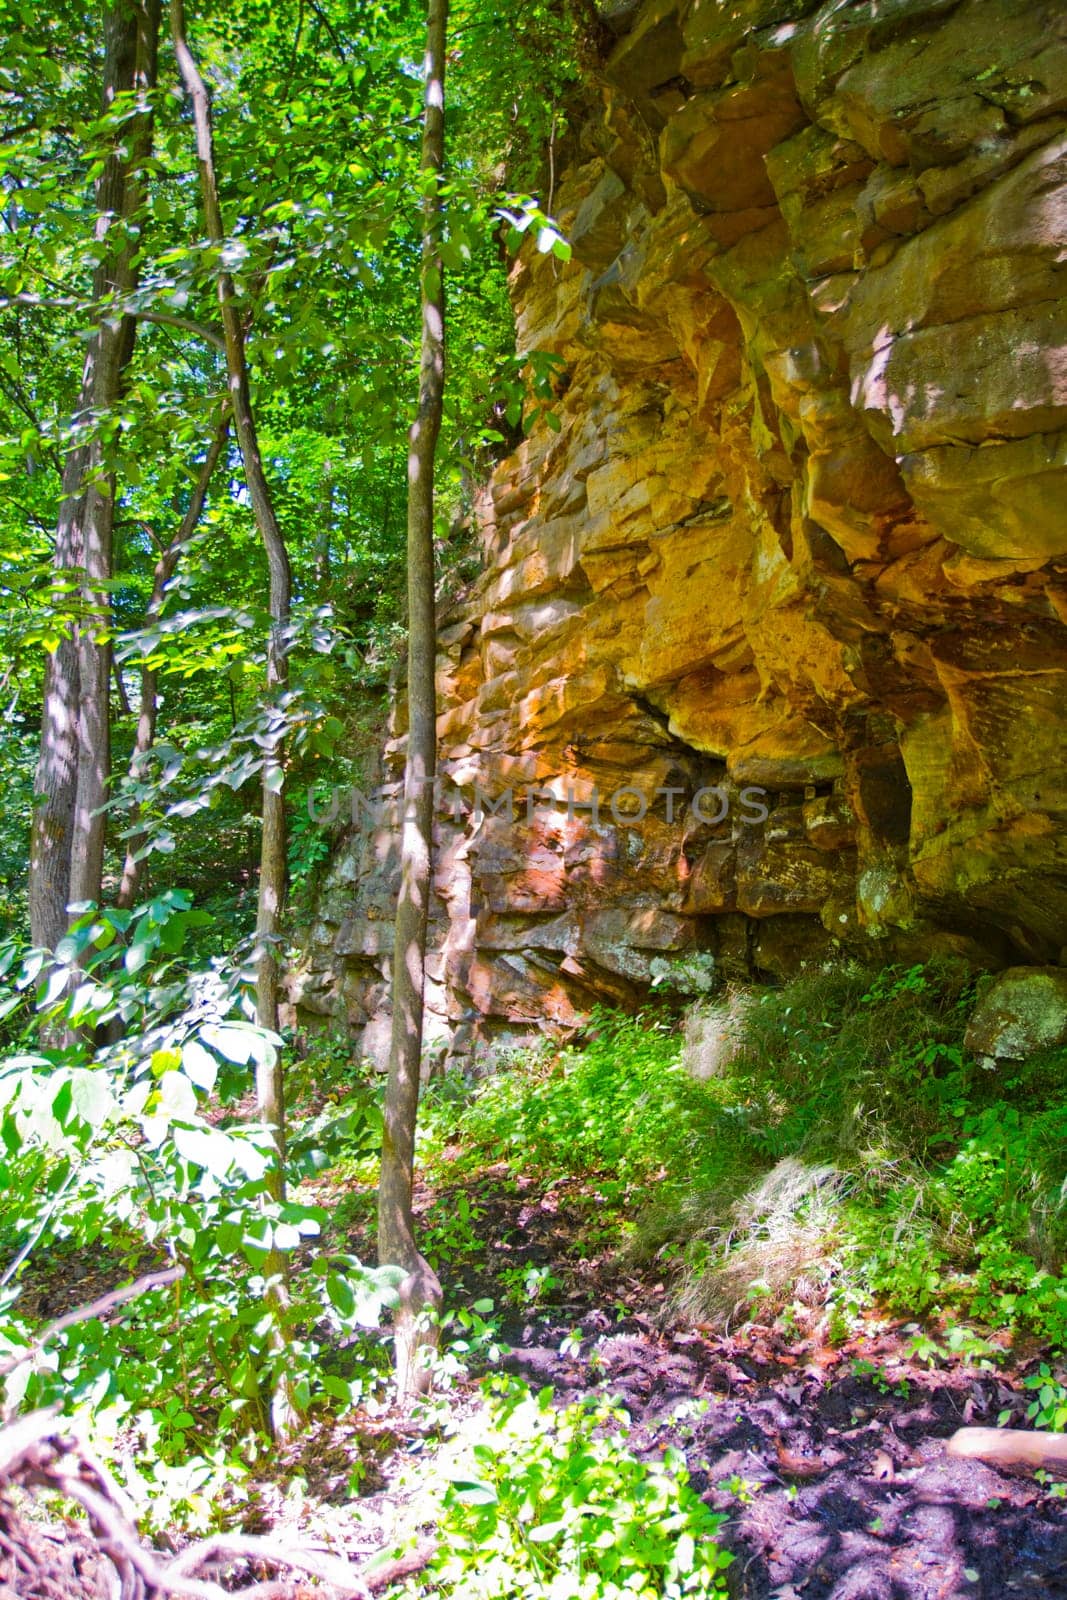 Tranquil Forest Retreat: A vibrant forest scene in Fitzgerald County Park, Lansing, Michigan, showcasing lush green trees, rugged rock formations with layers of sedimentary stone in earthy hues, and dapples of sunlight.